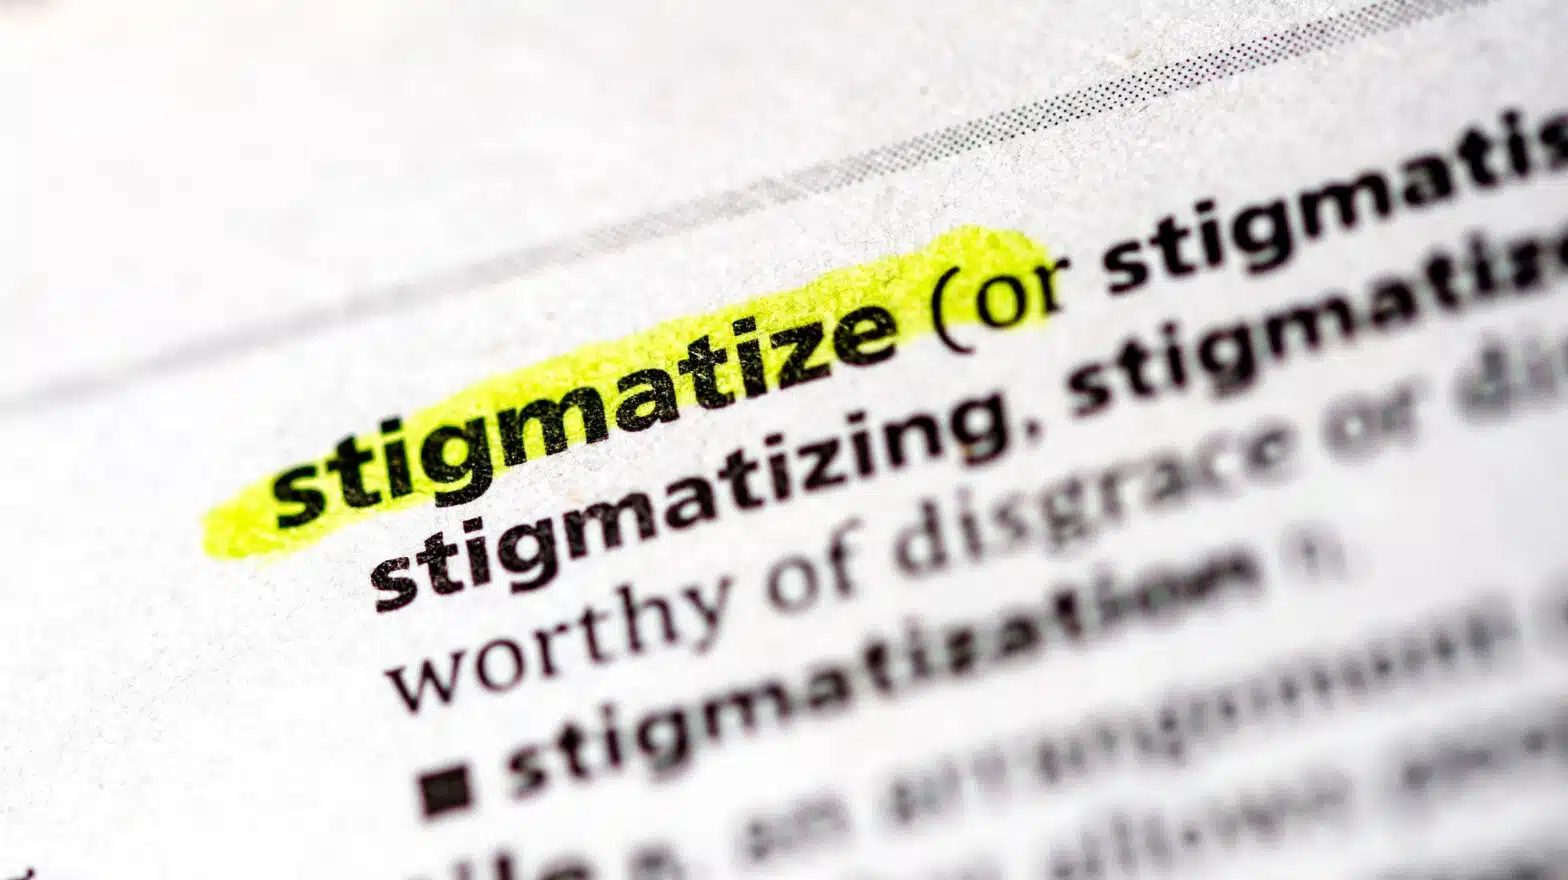 A dictionary page defining "stigmatize", the word stigmatize is highlighted - Common Myths About Substance Use Disorders